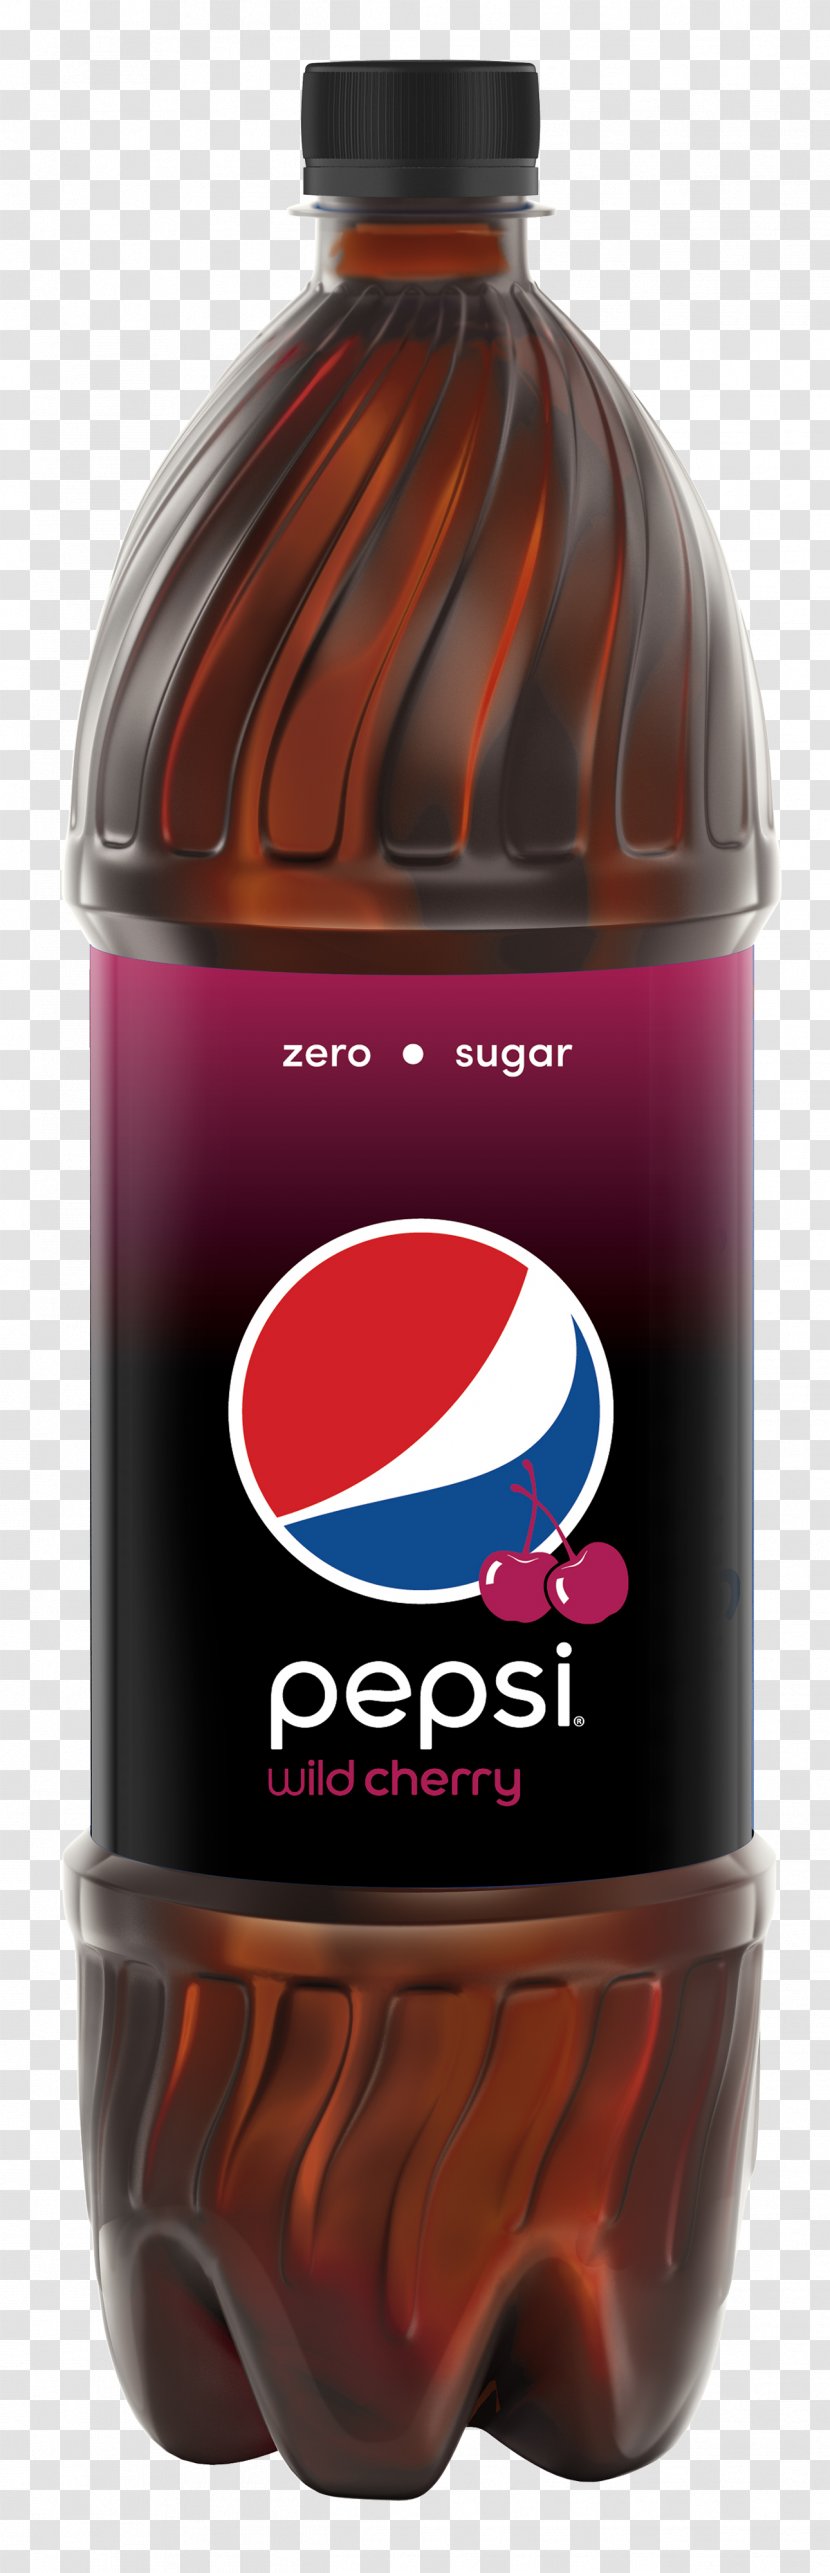 Pepsi One Fizzy Drinks Cola Baikal - Schweppes Transparent PNG